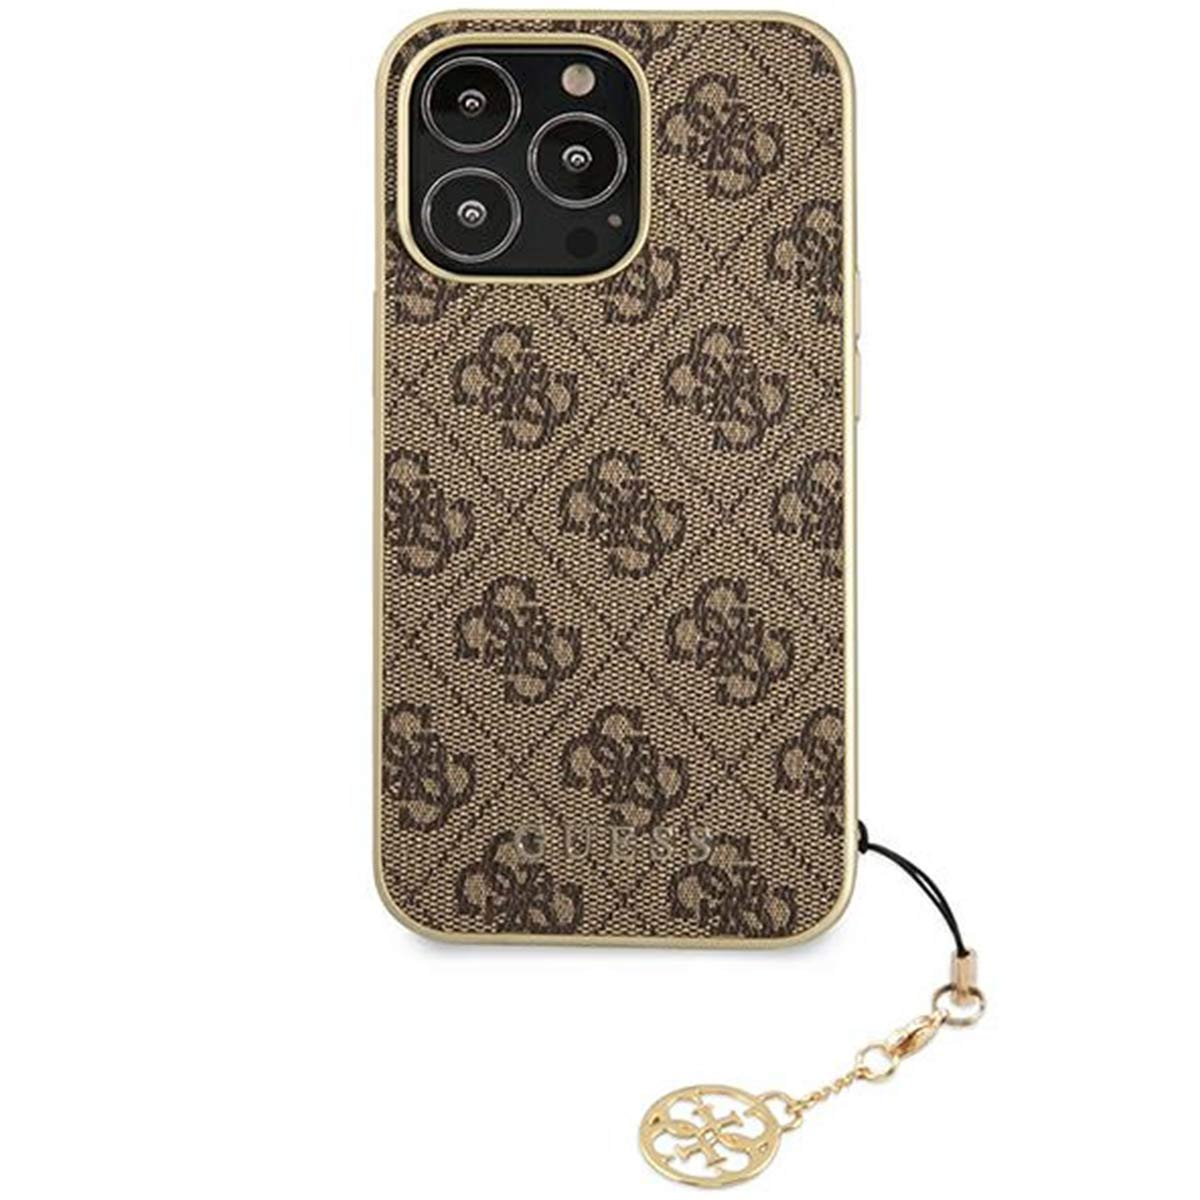 Guess Pro 14 - for Full Max, Case iPhone Charms GUESS Collection 14 iPhone Multicolor Pro (Brown), 4G Max Apple, Cover,